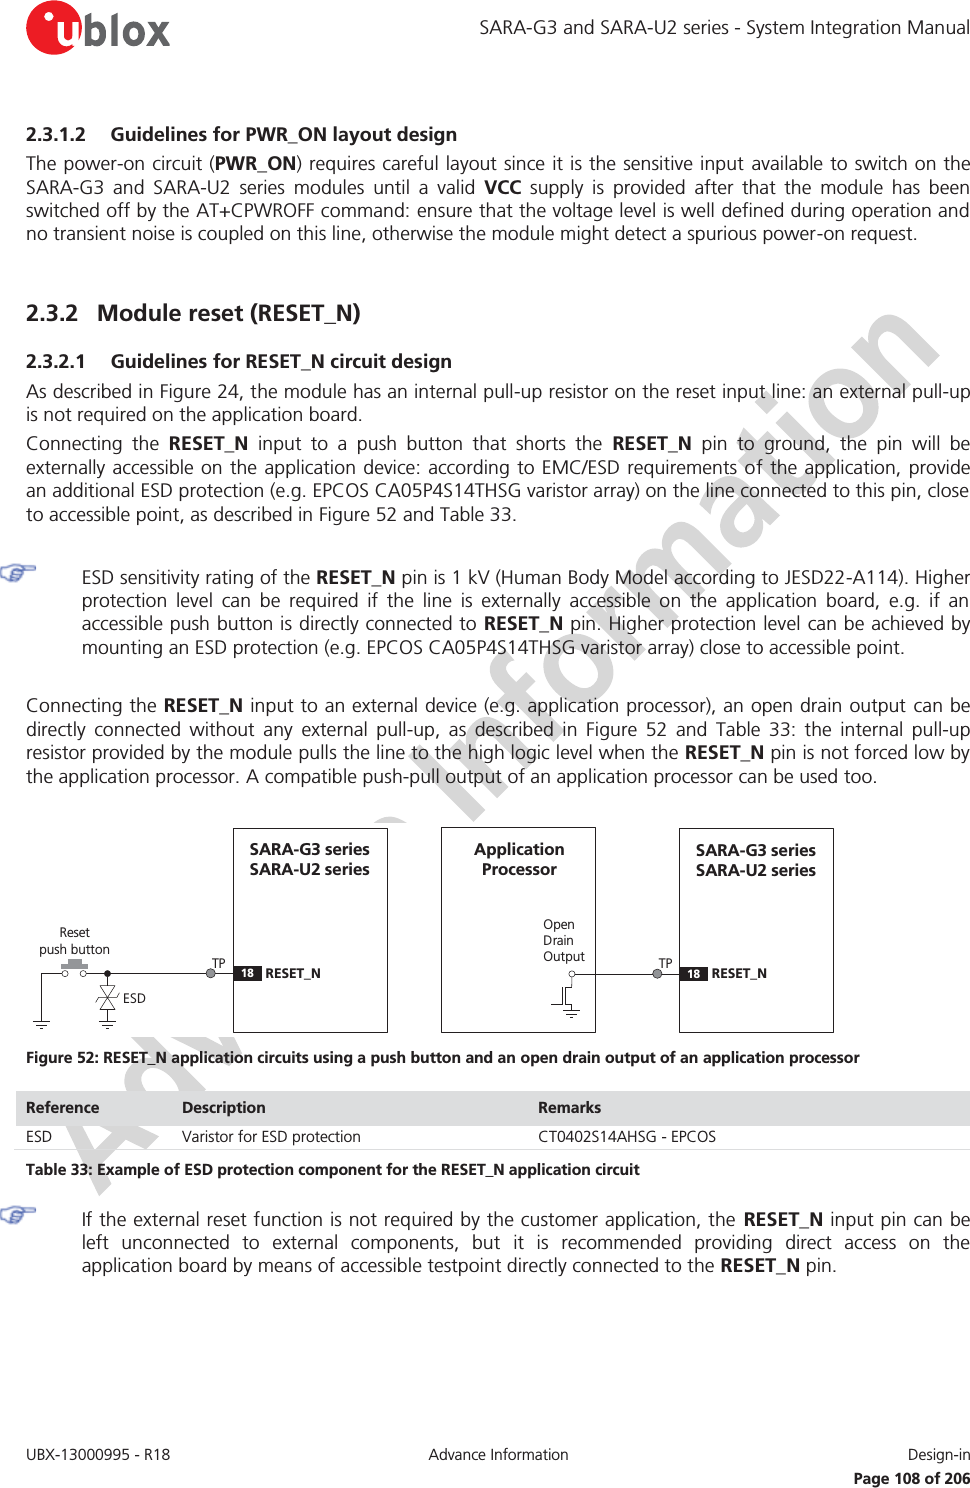 SARA-G3 and SARA-U2 series - System Integration Manual UBX-13000995 - R18  Advance Information  Design-in   Page 108 of 206 2.3.1.2 Guidelines for PWR_ON layout design The power-on circuit (PWR_ON) requires careful layout since it is the sensitive input available to switch on the SARA-G3 and SARA-U2 series modules until a valid VCC supply is provided after that the module has been switched off by the AT+CPWROFF command: ensure that the voltage level is well defined during operation and no transient noise is coupled on this line, otherwise the module might detect a spurious power-on request.  2.3.2 Module reset (RESET_N) 2.3.2.1 Guidelines for RESET_N circuit design As described in Figure 24, the module has an internal pull-up resistor on the reset input line: an external pull-up is not required on the application board. Connecting the RESET_N input to a push button that shorts the RESET_N pin to ground, the pin will be externally accessible on the application device: according to EMC/ESD requirements of the application, provide an additional ESD protection (e.g. EPCOS CA05P4S14THSG varistor array) on the line connected to this pin, close to accessible point, as described in Figure 52 and Table 33.   ESD sensitivity rating of the RESET_N pin is 1 kV (Human Body Model according to JESD22-A114). Higher protection level can be required if the line is externally accessible on the application board, e.g. if an accessible push button is directly connected to RESET_N pin. Higher protection level can be achieved by mounting an ESD protection (e.g. EPCOS CA05P4S14THSG varistor array) close to accessible point.  Connecting the RESET_N input to an external device (e.g. application processor), an open drain output can be directly connected without any external pull-up, as described in Figure 52 and Table 33: the internal pull-up resistor provided by the module pulls the line to the high logic level when the RESET_N pin is not forced low by the application processor. A compatible push-pull output of an application processor can be used too.  SARA-G3 seriesSARA-U2 series18RESET_NReset      push buttonESDOpen Drain OutputApplication ProcessorSARA-G3 seriesSARA-U2 series18RESET_NTP TP Figure 52: RESET_N application circuits using a push button and an open drain output of an application processor Reference  Description  Remarks ESD Varistor for ESD protection CT0402S14AHSG - EPCOS Table 33: Example of ESD protection component for the RESET_N application circuit  If the external reset function is not required by the customer application, the RESET_N input pin can be left unconnected to external components, but it is recommended providing direct access on the application board by means of accessible testpoint directly connected to the RESET_N pin.  